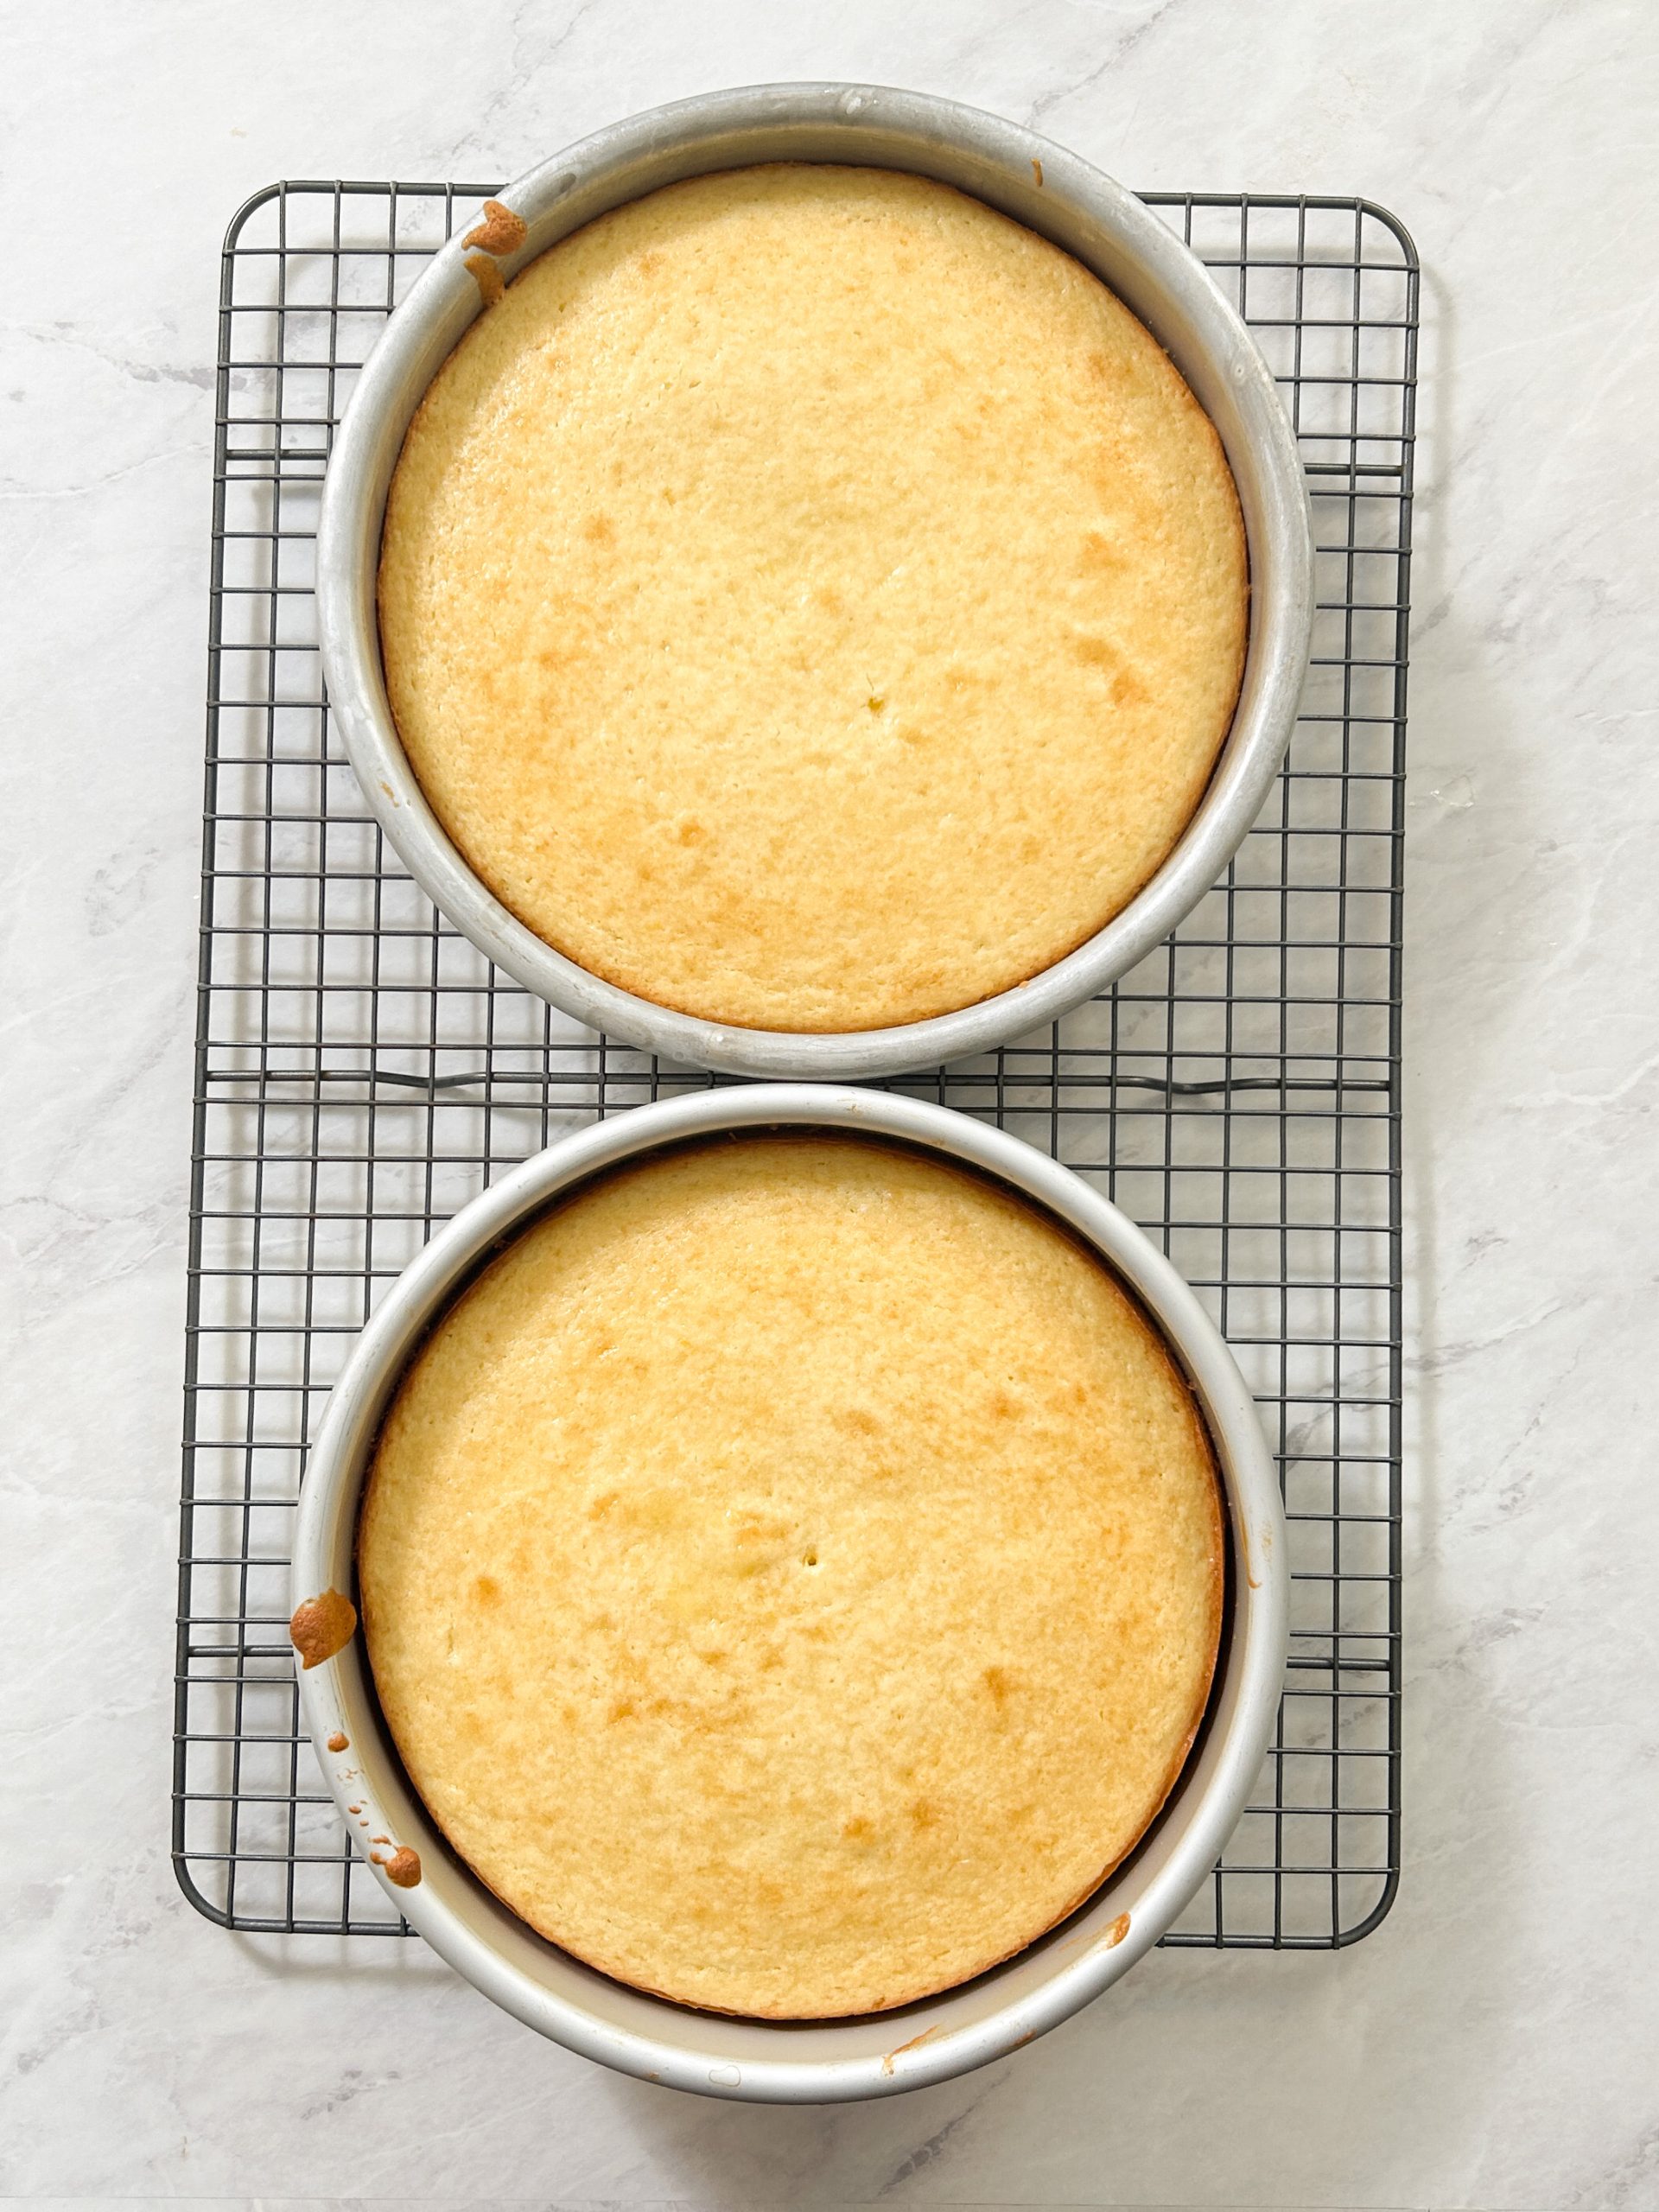 2 baked cakes in 2 cake pans; light golden color